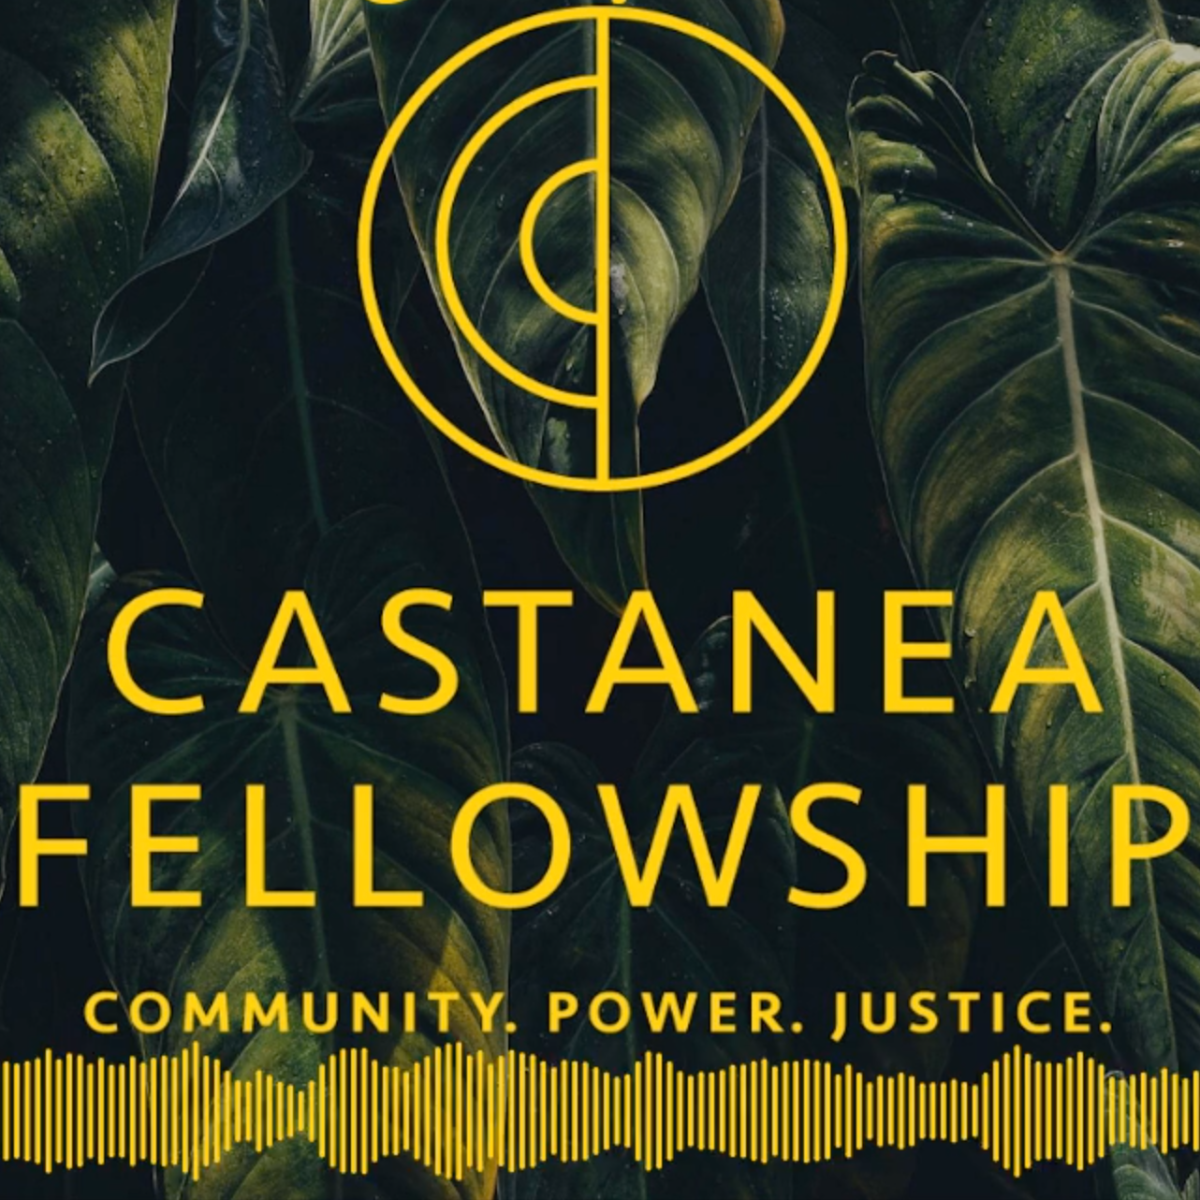 Castanea logo in yellow. Castanea Fellowship Community. Power. Justice. in yellow text. Yellow audio wave lines at the bottom. All text in front of a green leafy background